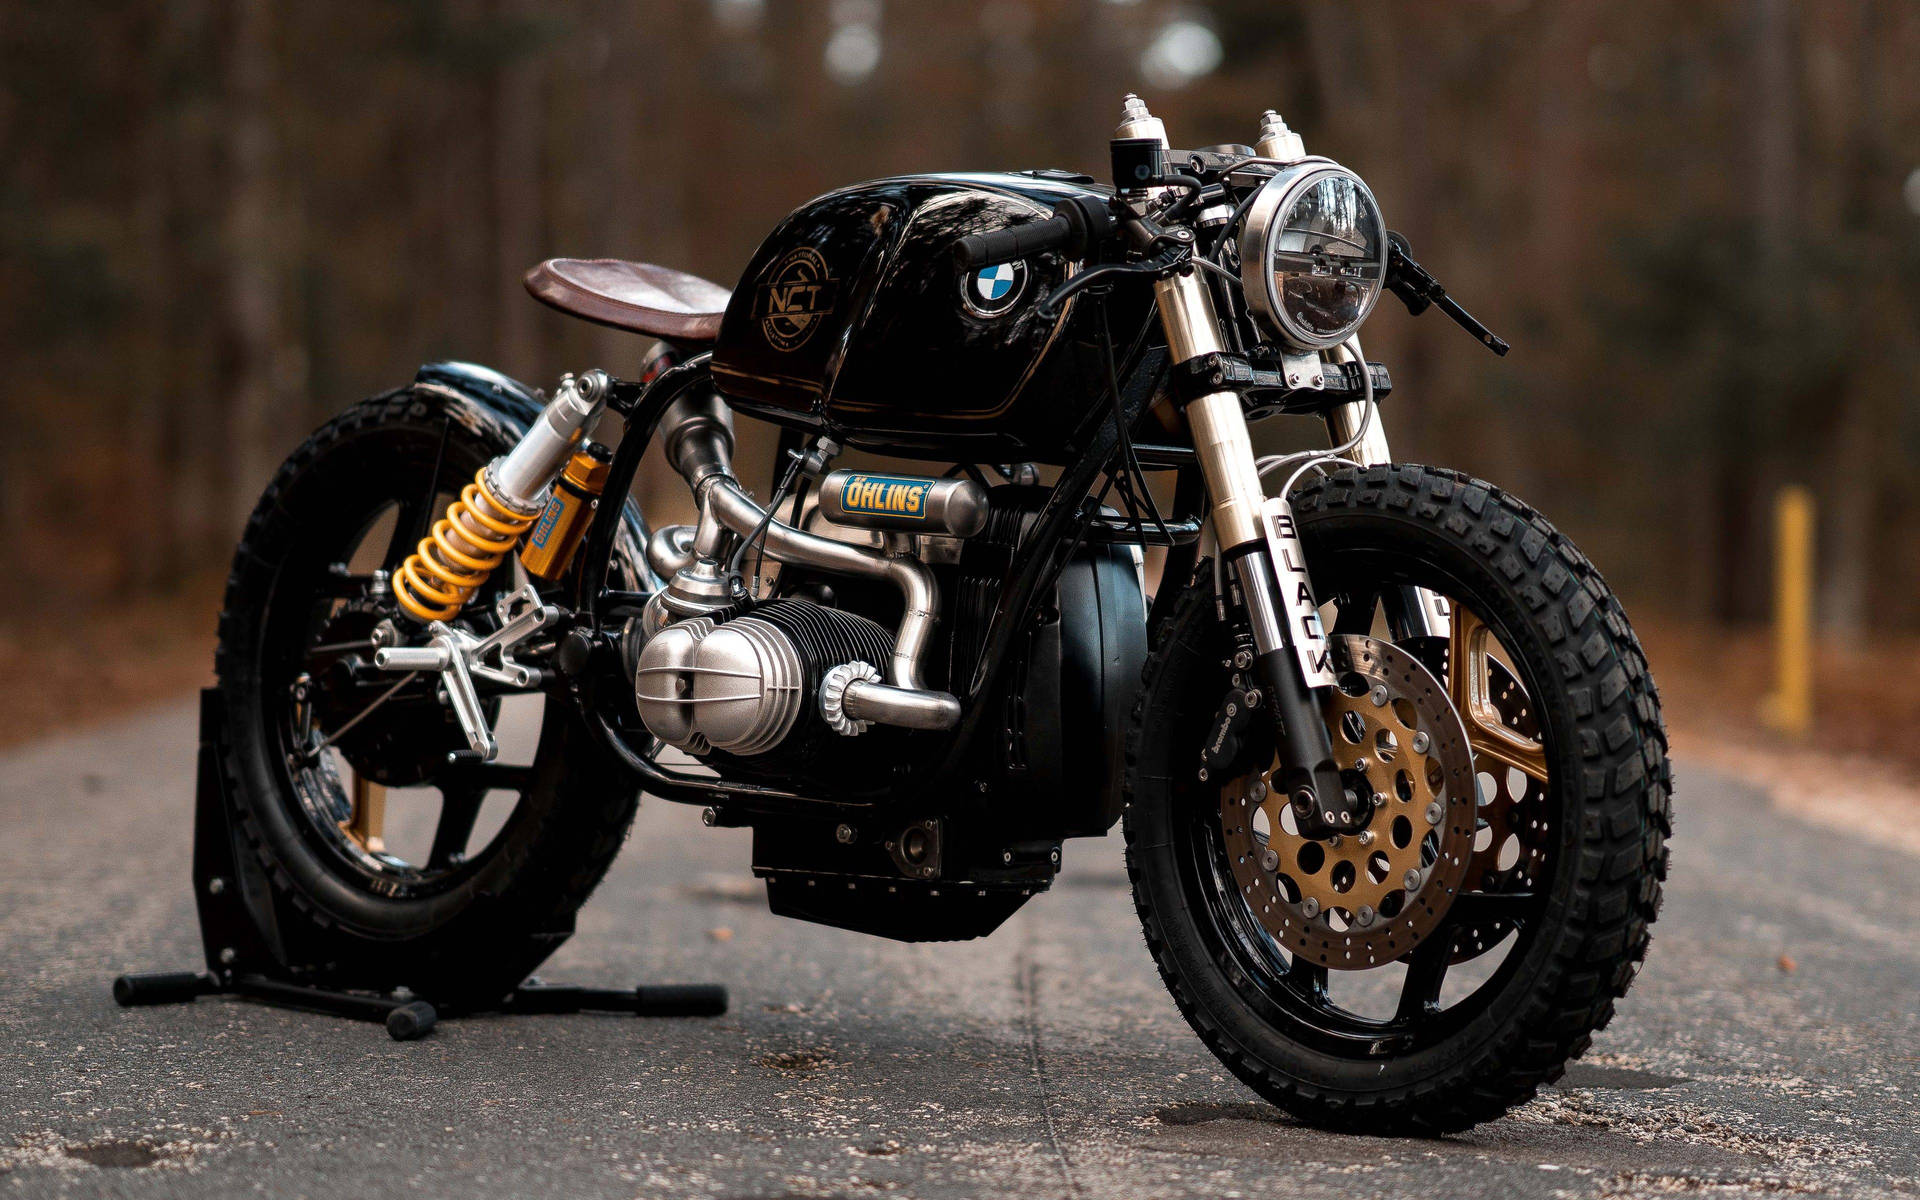 Hd Cafe Racer Motorcycle Wallpaper